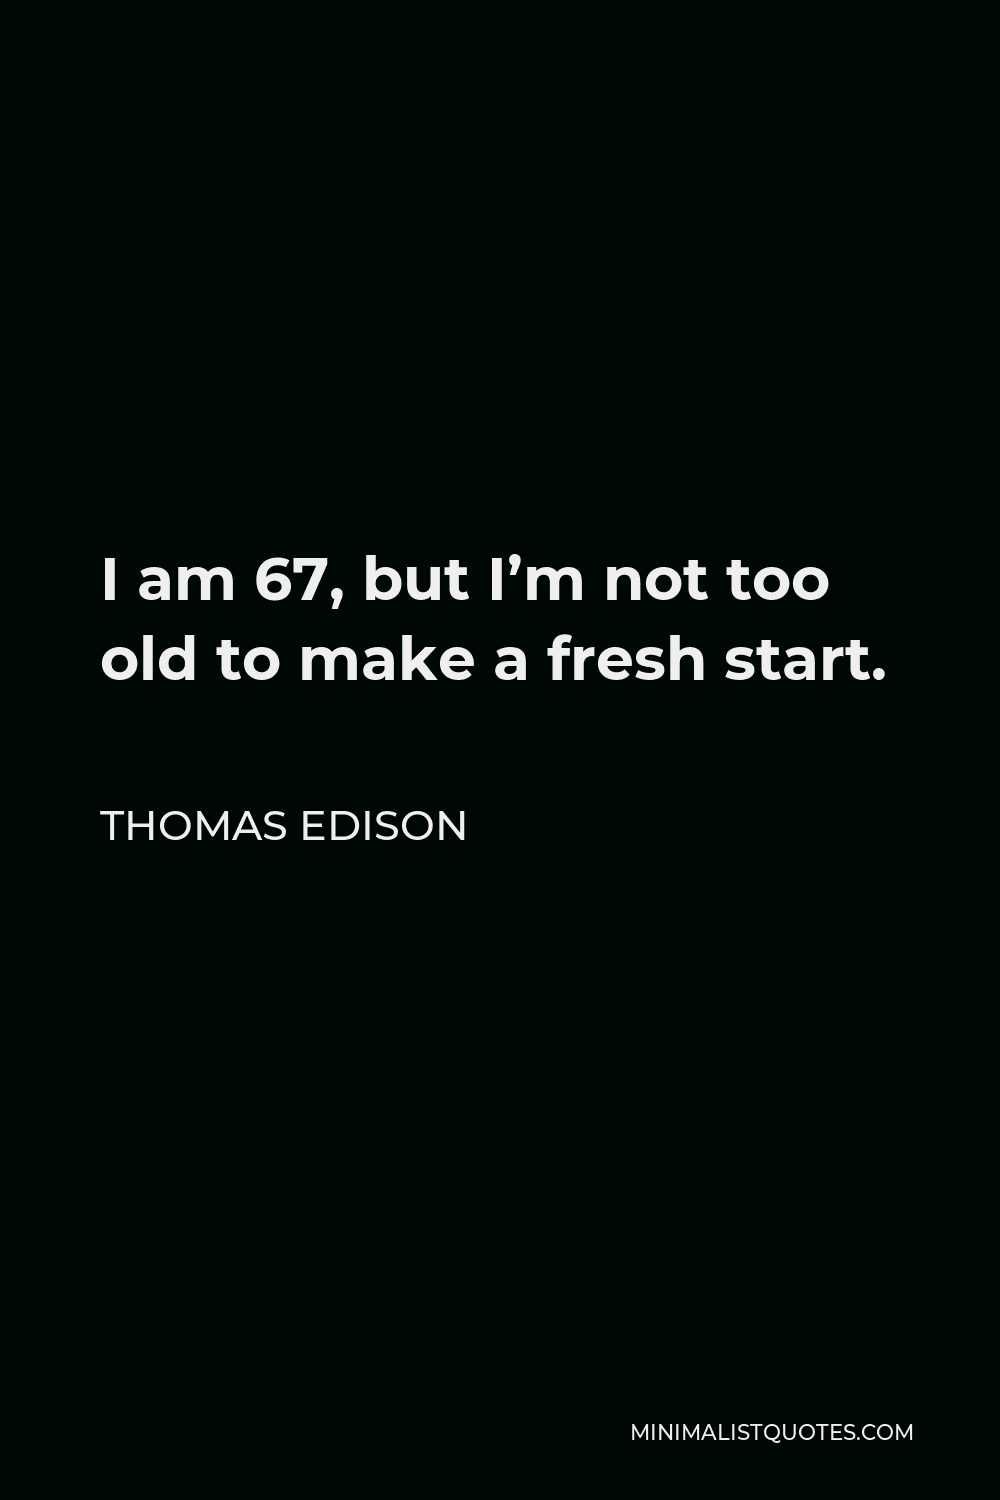 Thomas Edison Quote - I am 67, but I’m not too old to make a fresh start.